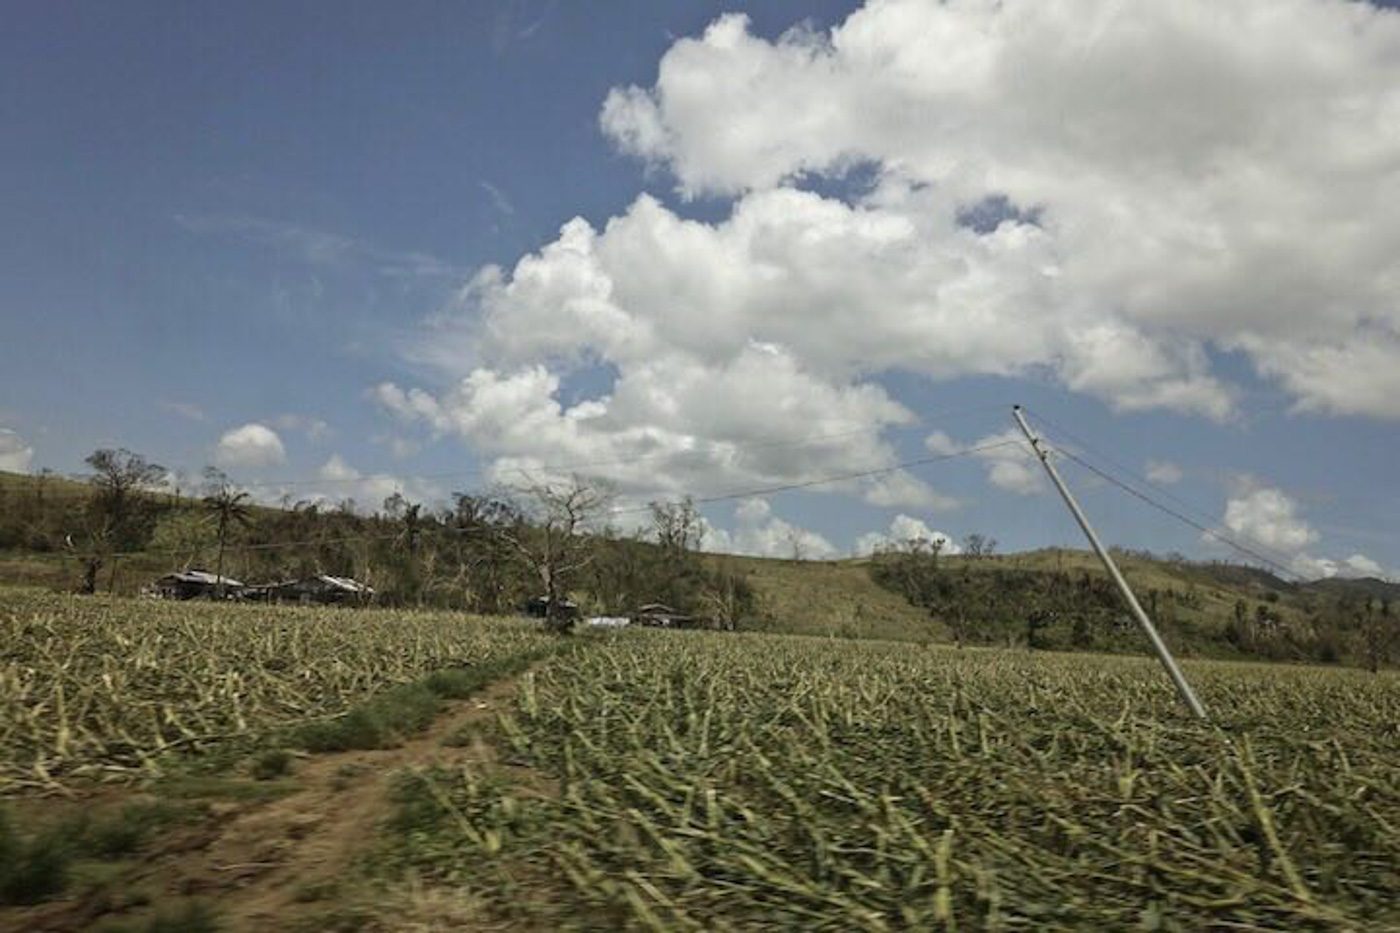 RUINED. Baggao town corn farms are swept by flood and wind from Typhoon Ompong. Photo by Rambo Talabong/Rappler  